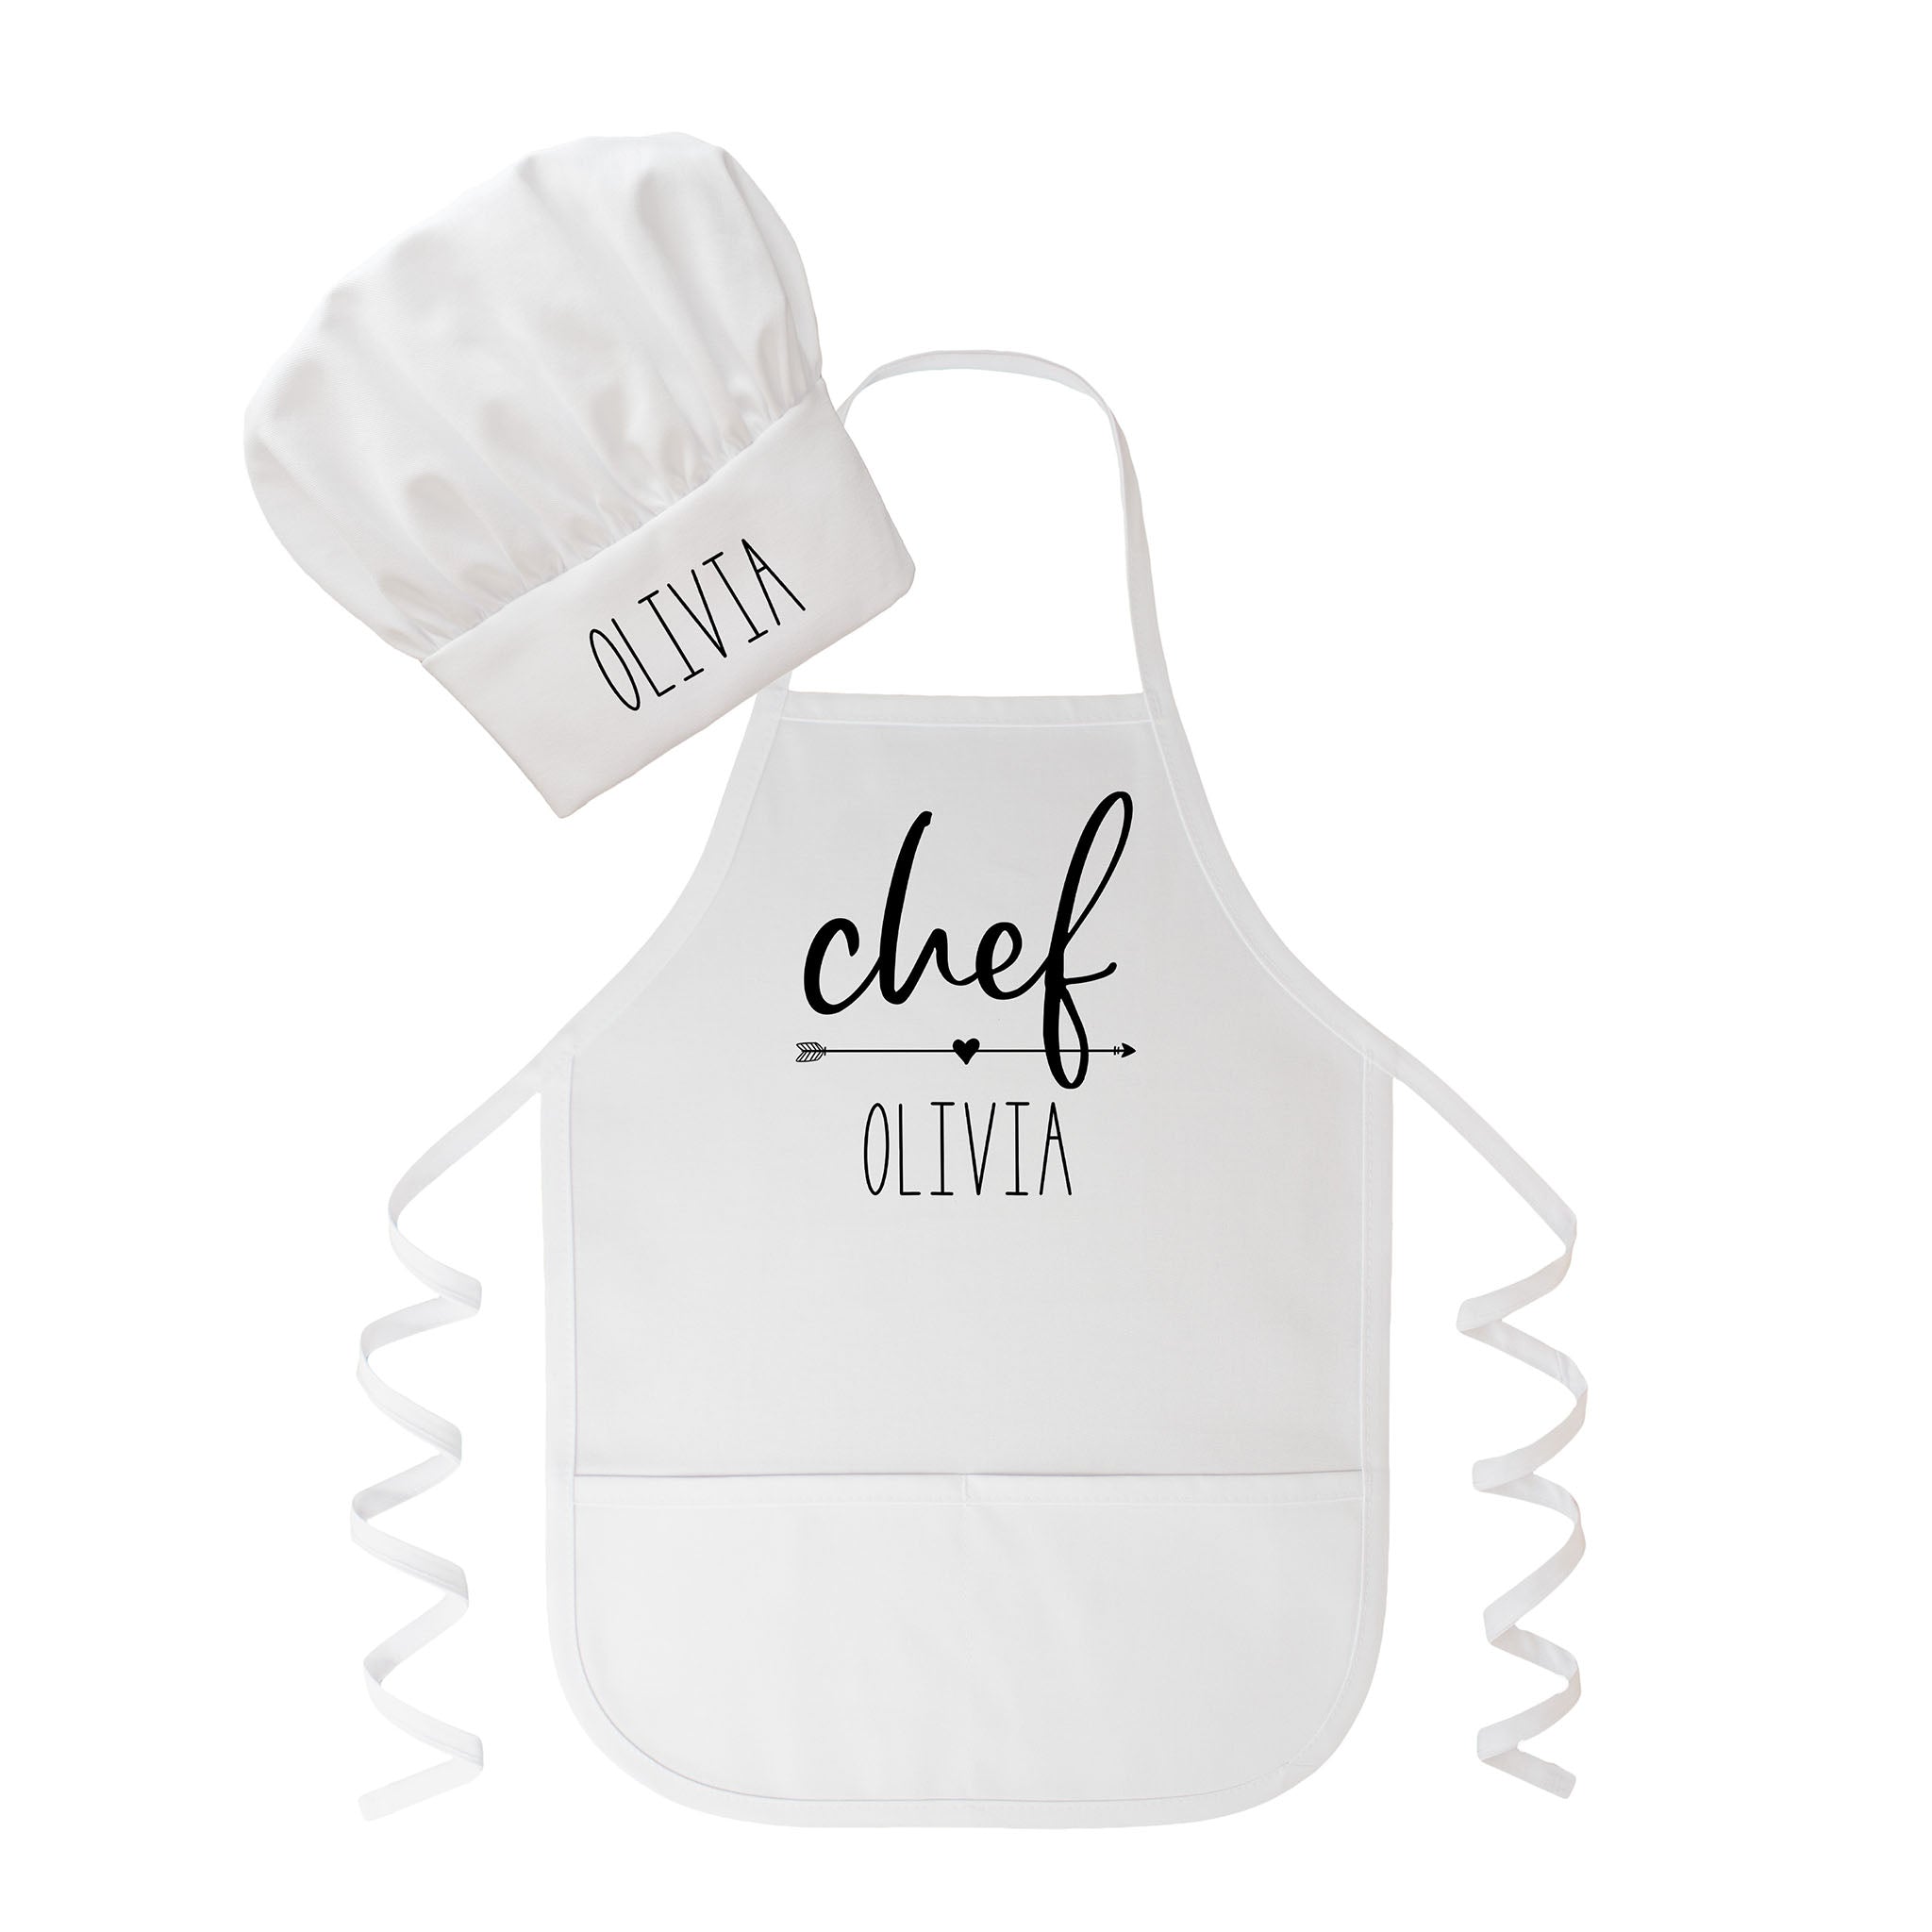 Leaf & Heart Personalized Chef Aprons for Toddlers, Kids and Adults